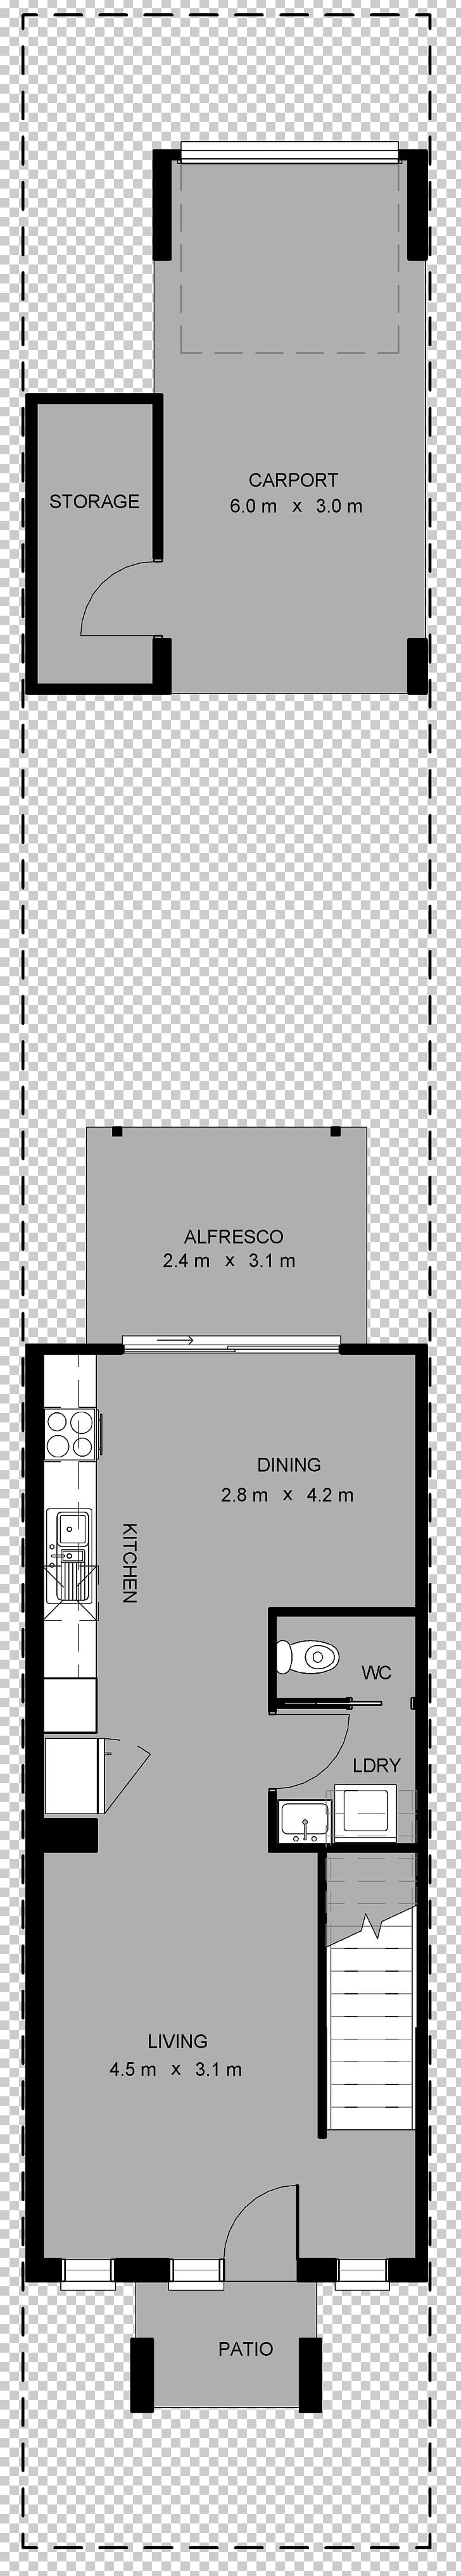 Floor Plan Angle PNG, Clipart, Angle, Area, Art, Black And White, Diagram Free PNG Download